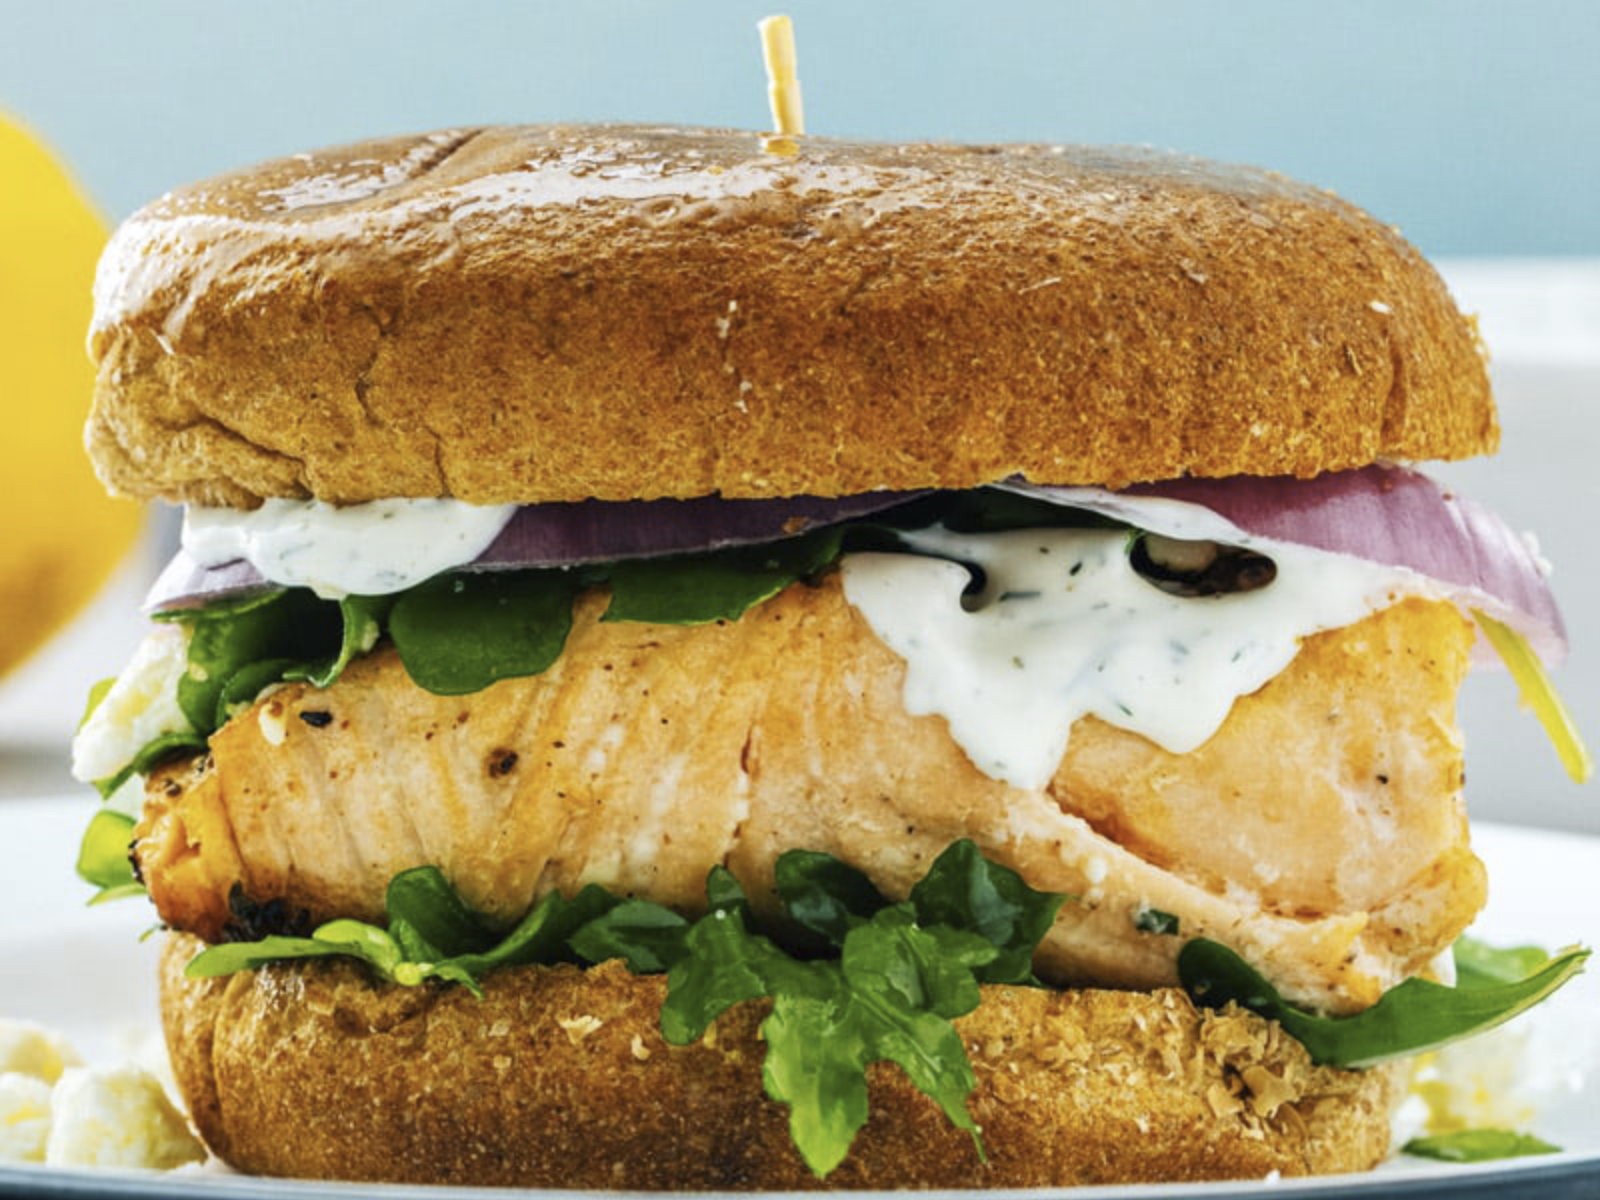 Salmon Sandwich with Dill Sauce